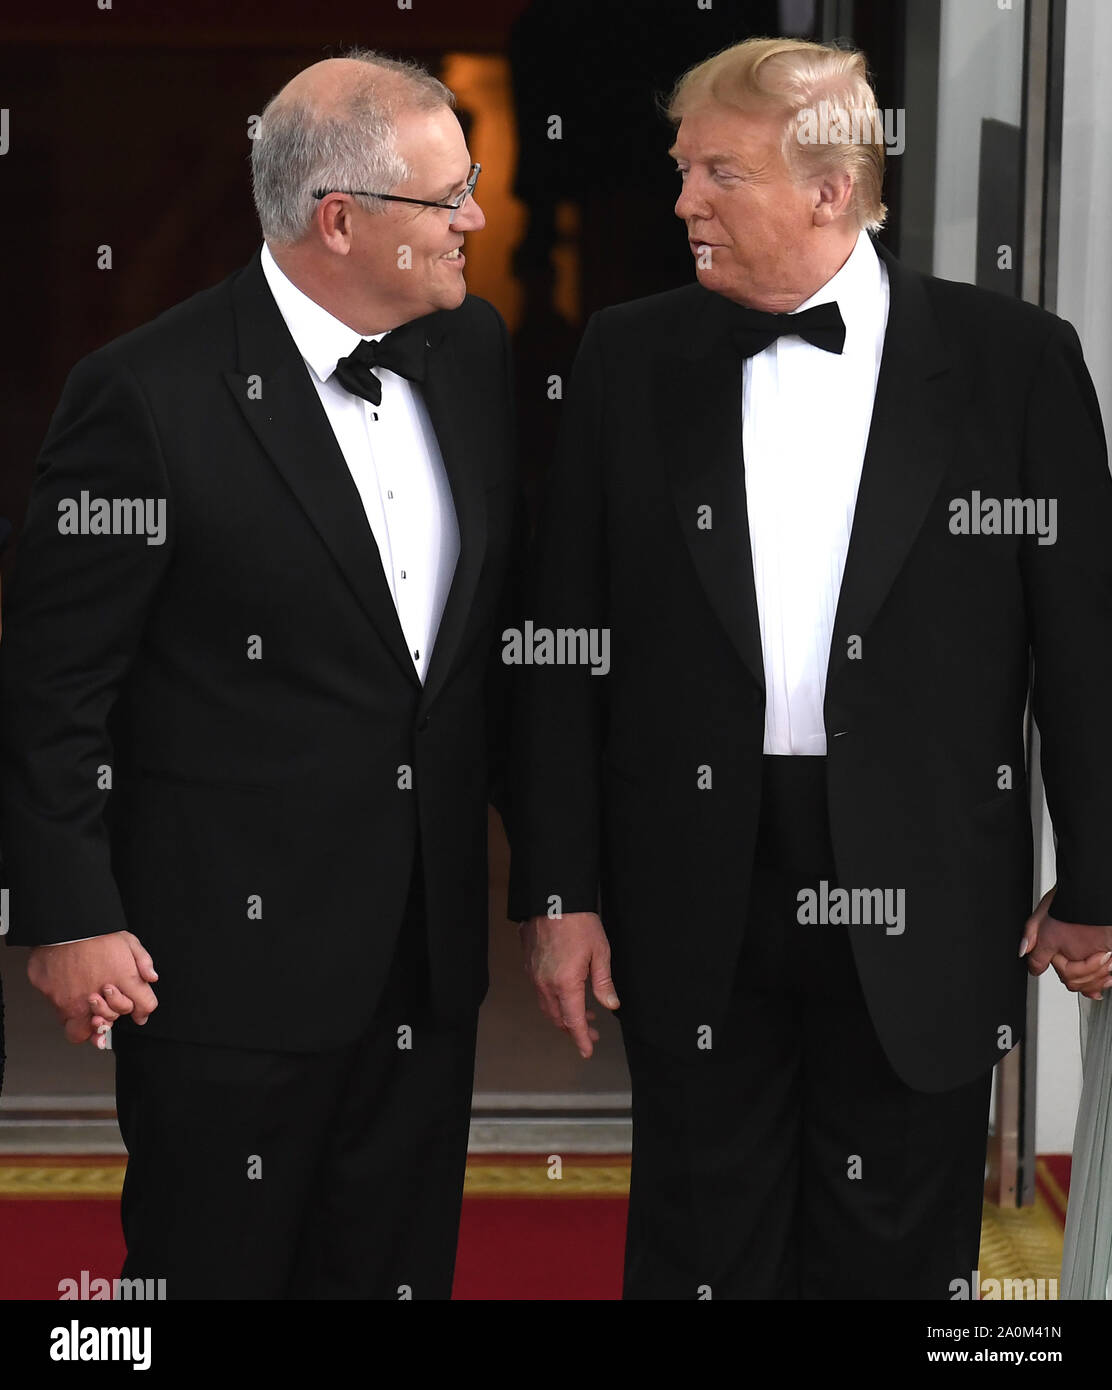 President Donald Trump (R) has a word with Australia's Prime Minister Scott Morrison as he and First Lady Melania Trump welcome him and Jennifer Morrison for a formal State Dinner, at the White House, Friday, September 20, 2019, in Washington, DC. The leaders capped a day in which they discussed trade, China and tensions in the Middle East.                        Photo by Mike Theiler/UPI Stock Photo